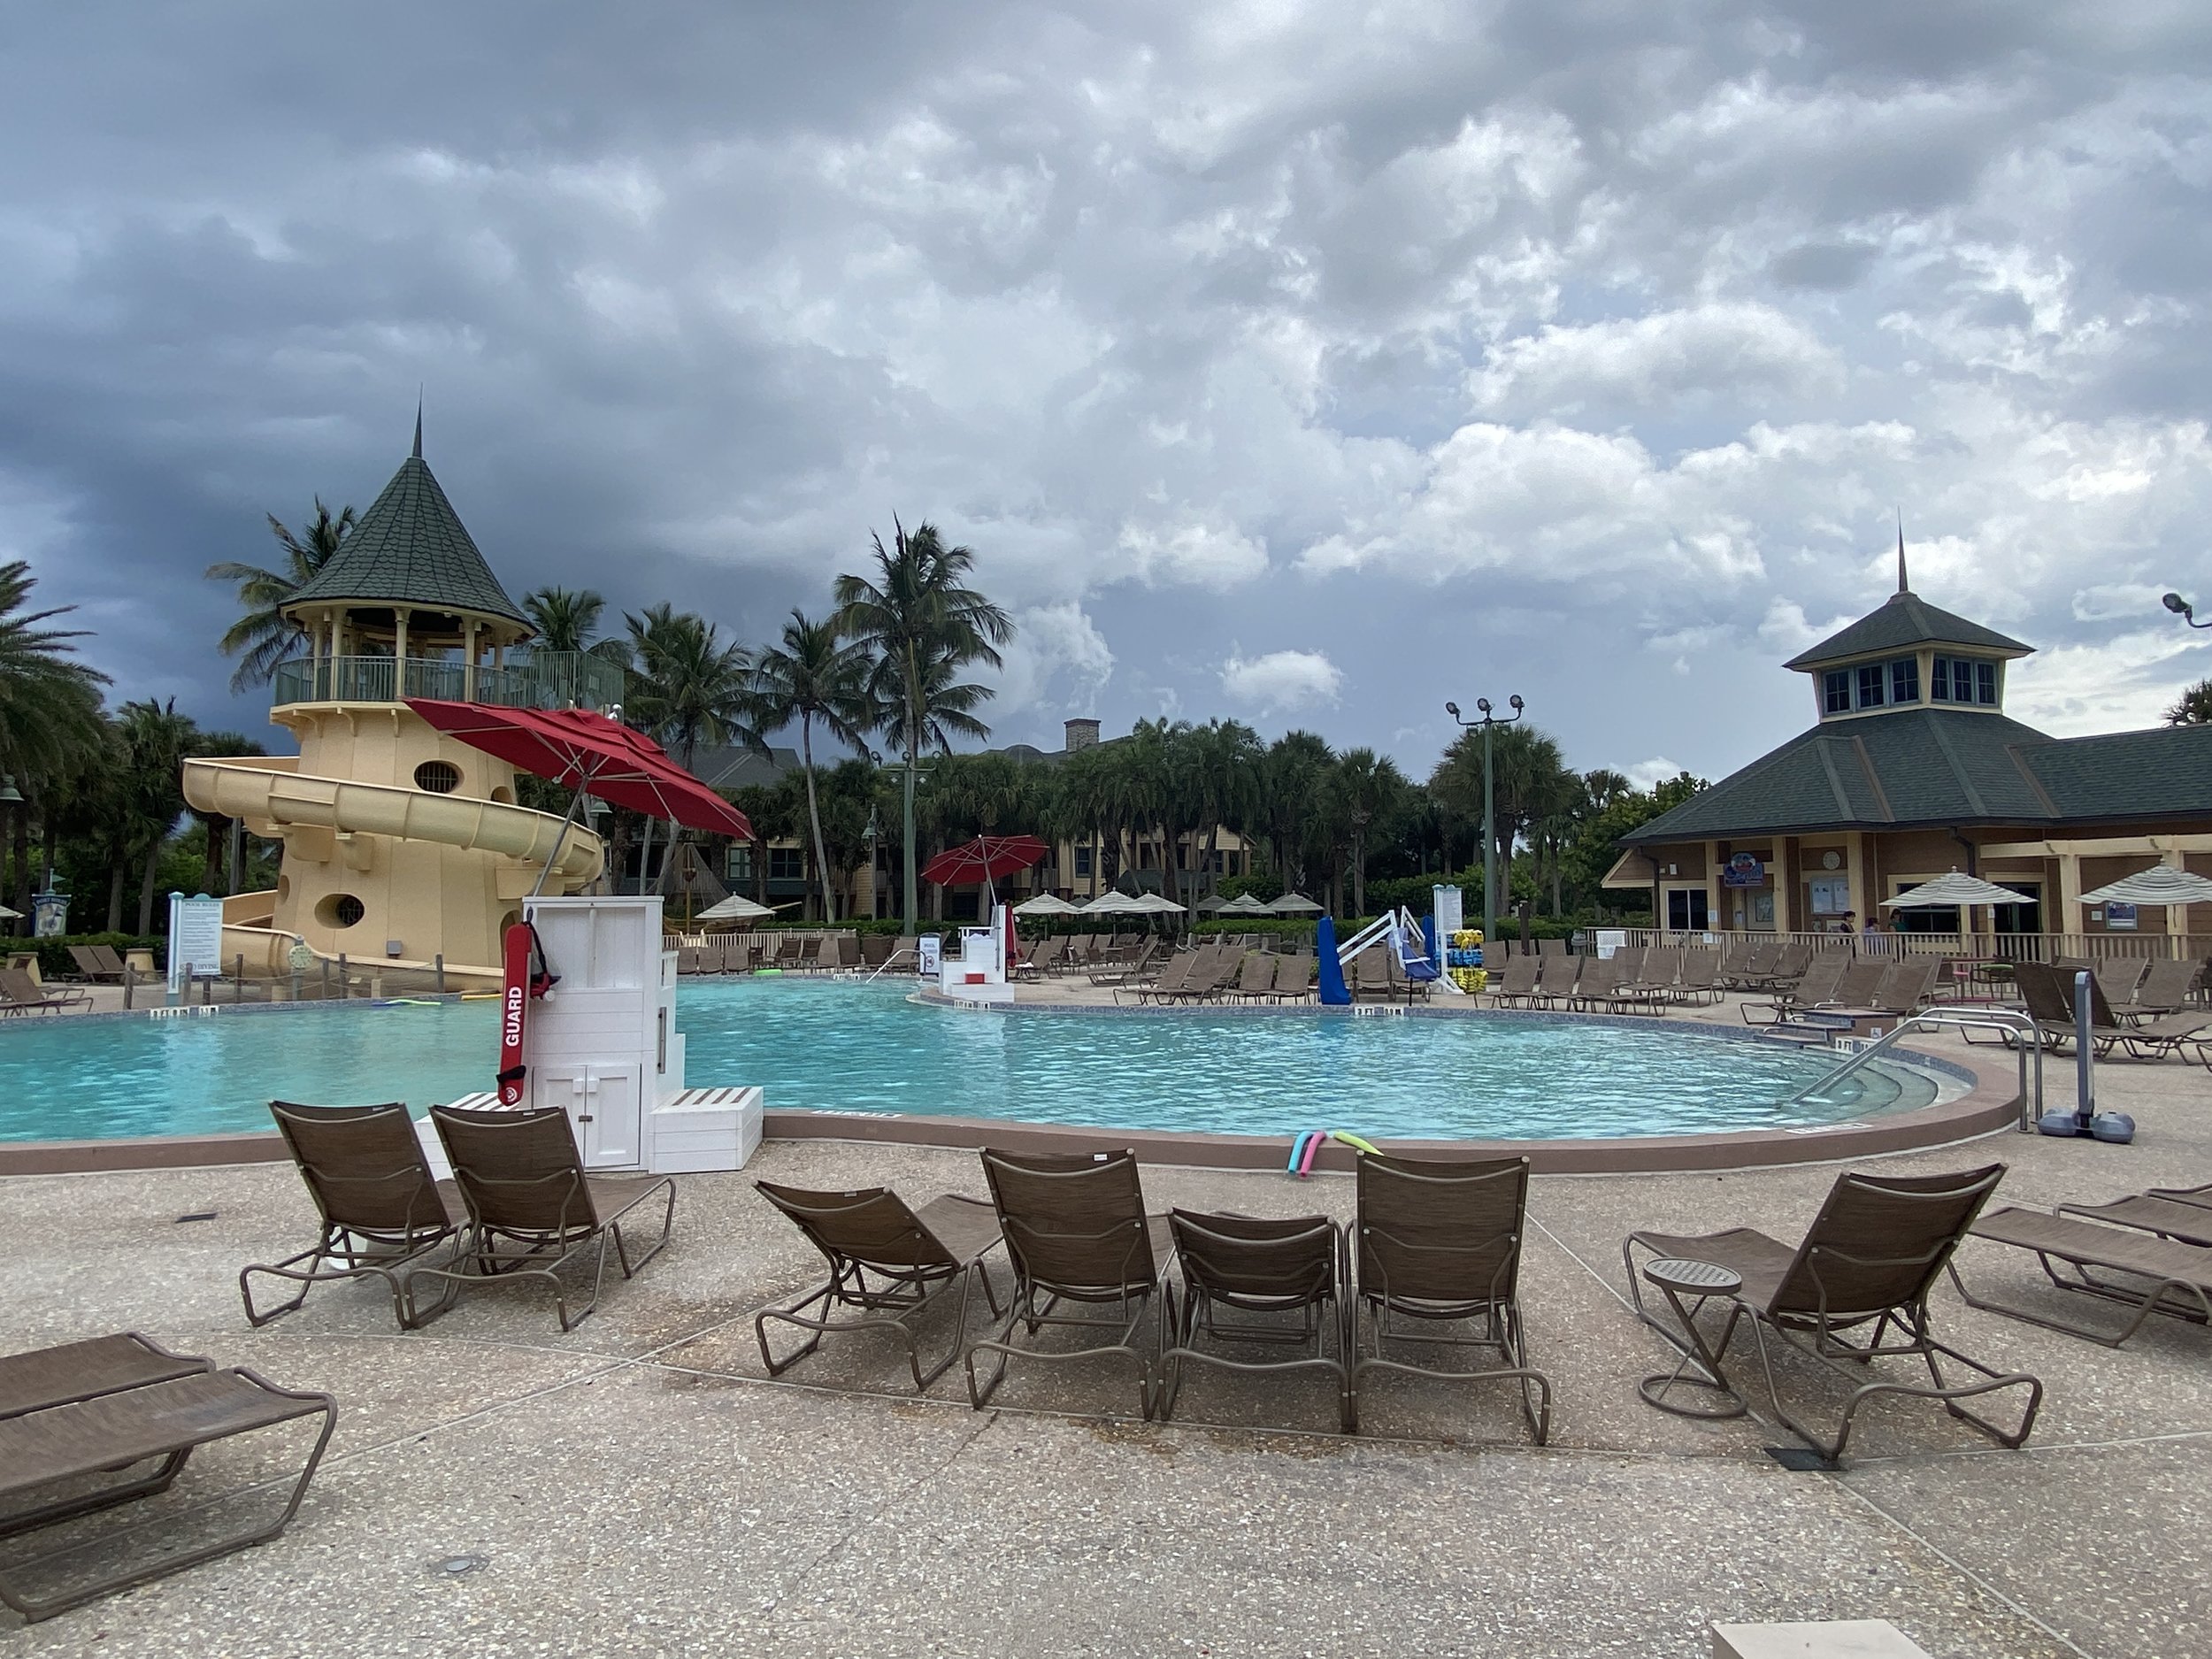  Mickey-shaped pool and Pirate's Plunge water slide. The water is heated in cooler weather and is opened all year.  